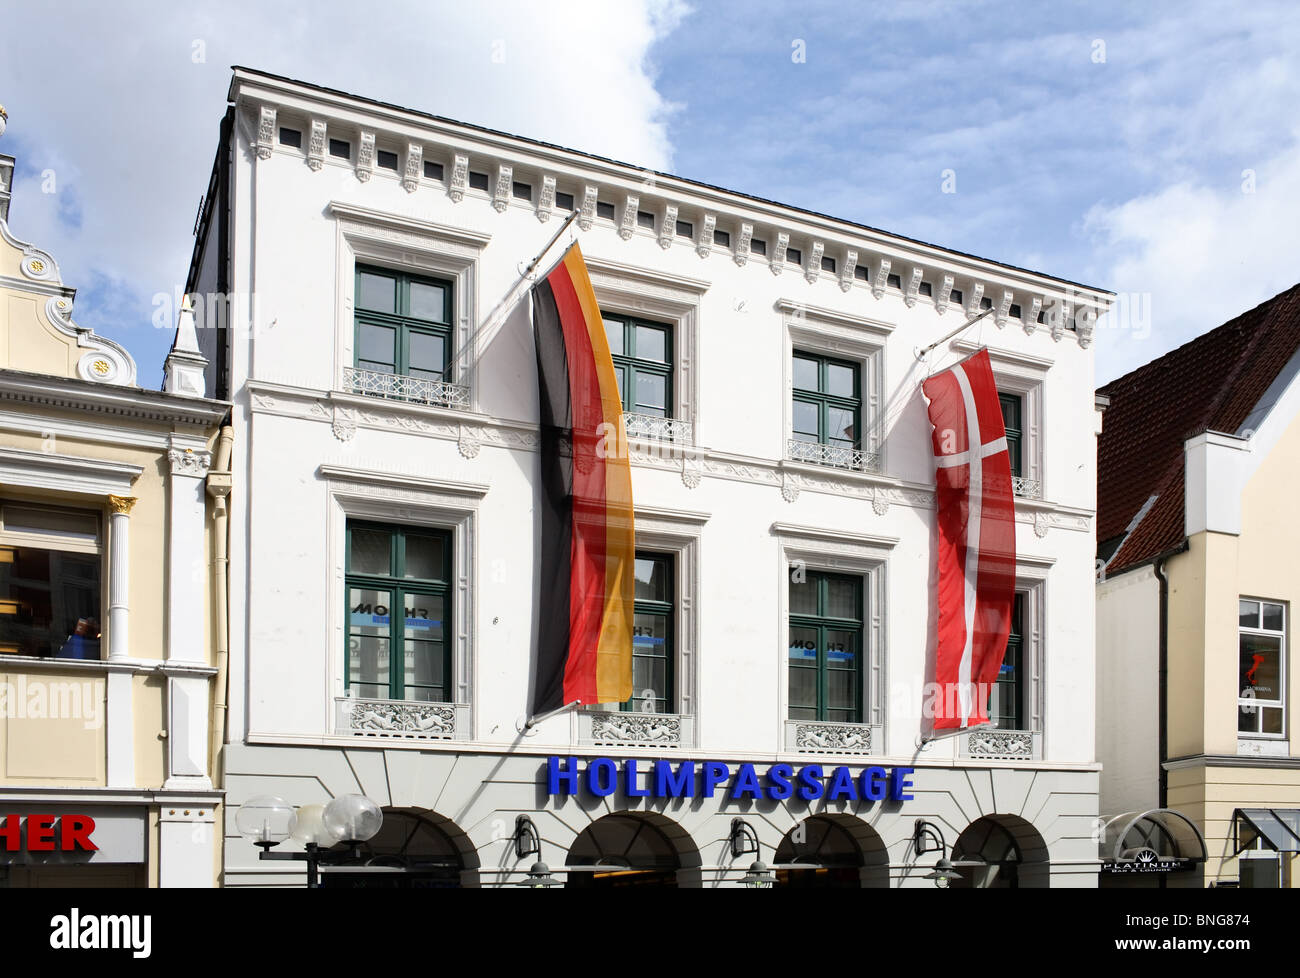 Holmpassage with German and Danish flags, Flensburg, Germany Stock Photo